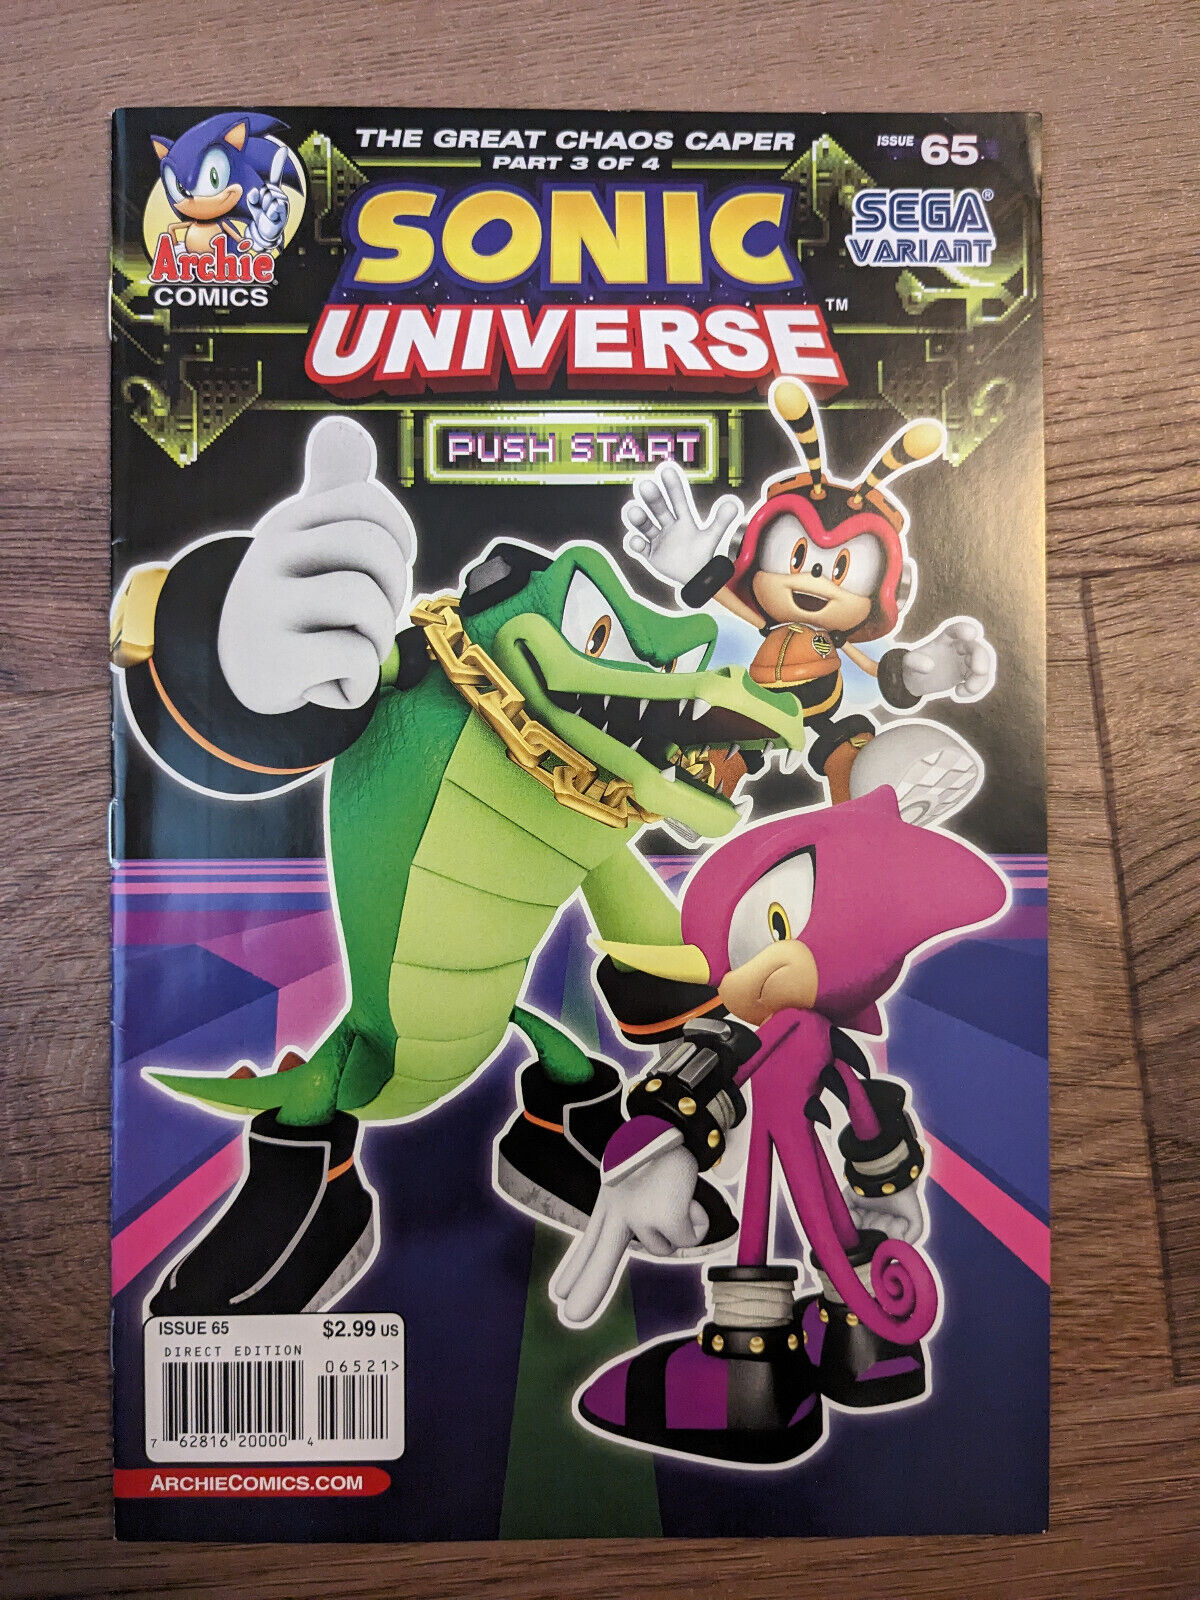 Sonic Universe #65 - Great Chaos Caper Pt 3 - Sega Variant - We Combine Shipping